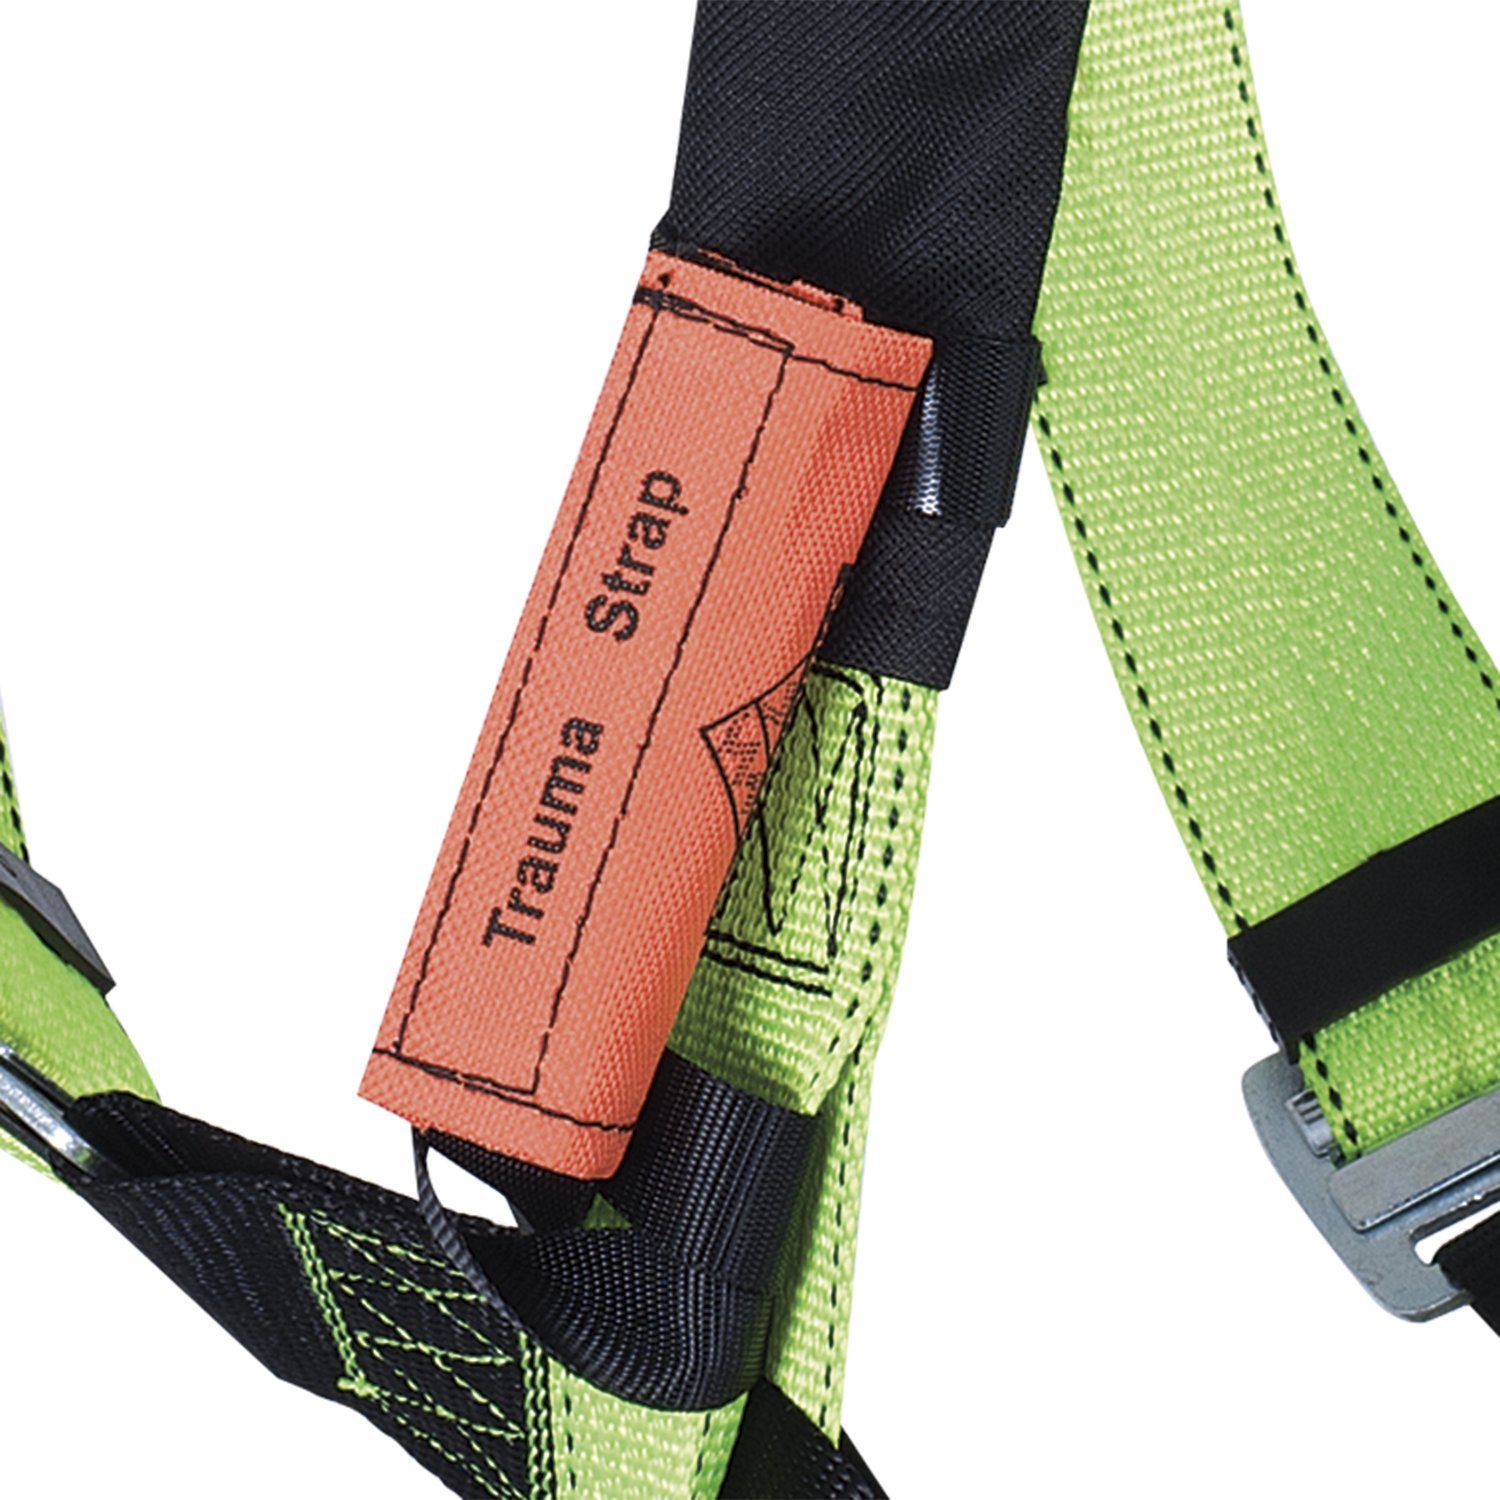 Peakworks Fall Protection Full Body Padded Safety Harness with Back Support, 5-Point Adjustment, Fall Indicator, Back D-Ring, Stab Lock Buckles, Hi Vis Green/Black, Universal Fit, V8006100, 3.5 lbs